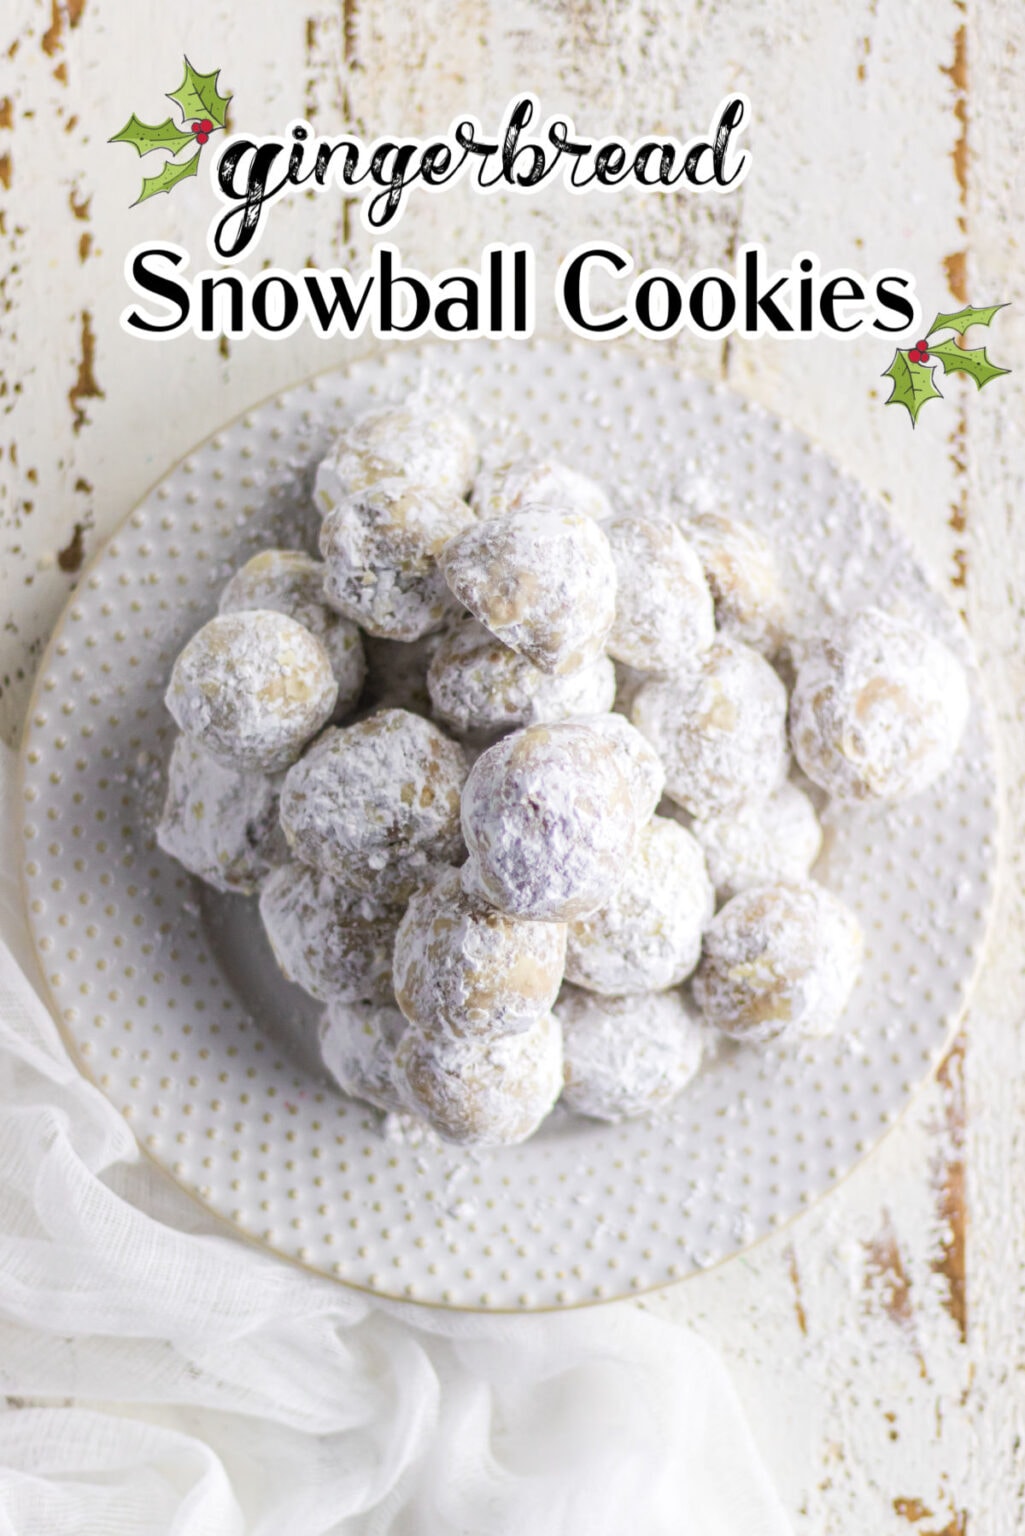 Gingerbread Snowball Cookies (no nuts) - Restless Chipotle